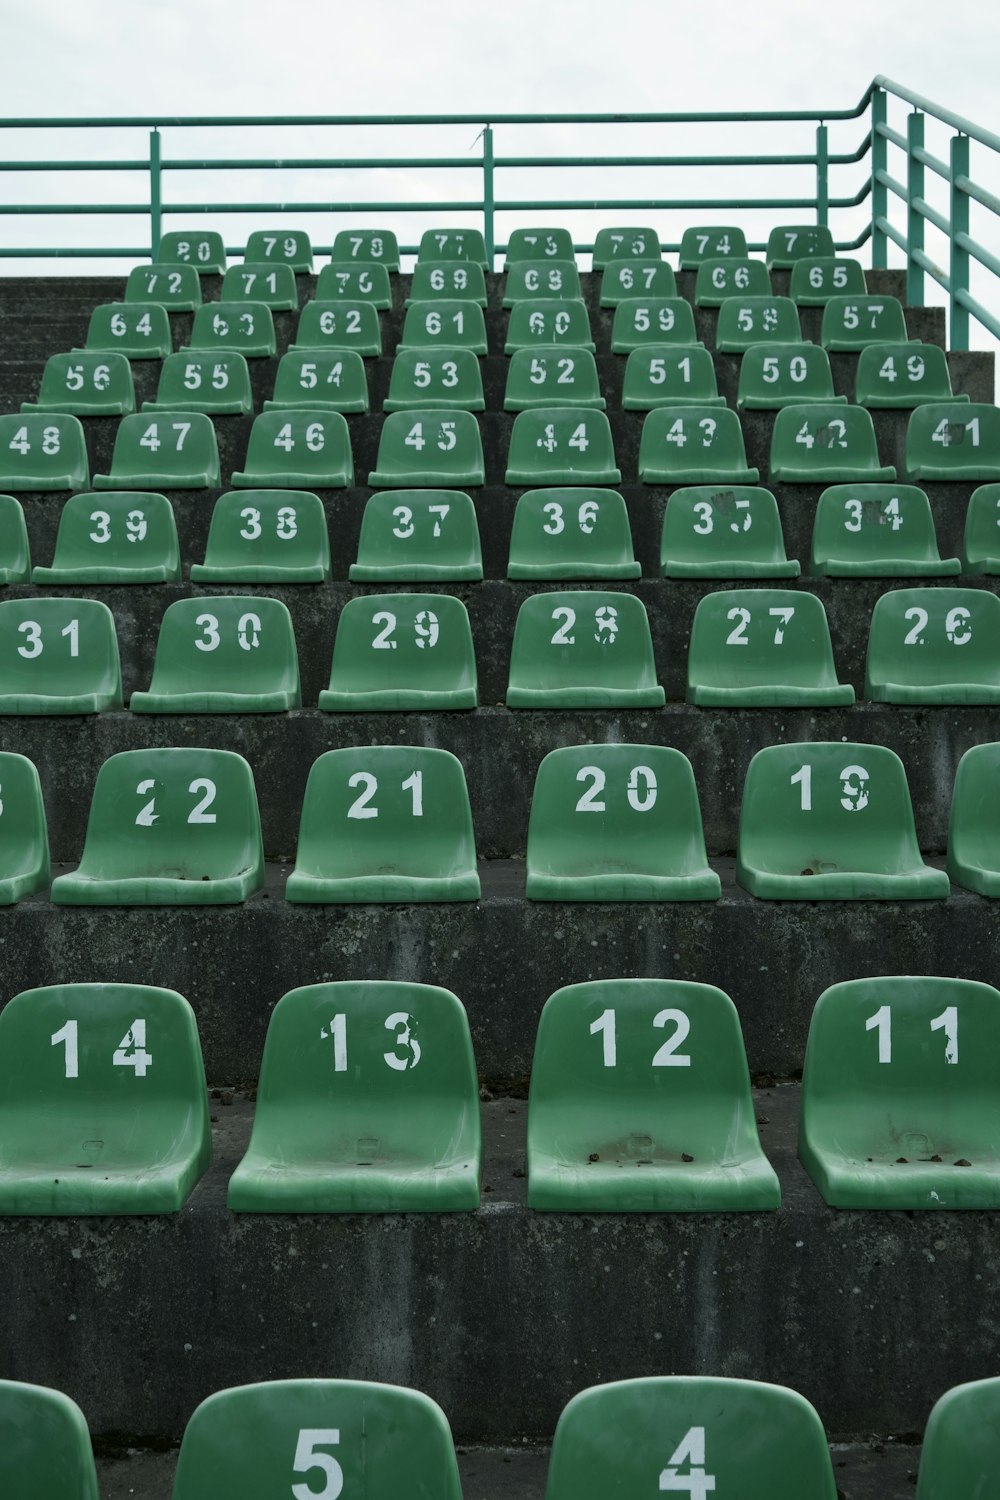 a row of green seats with numbers on them